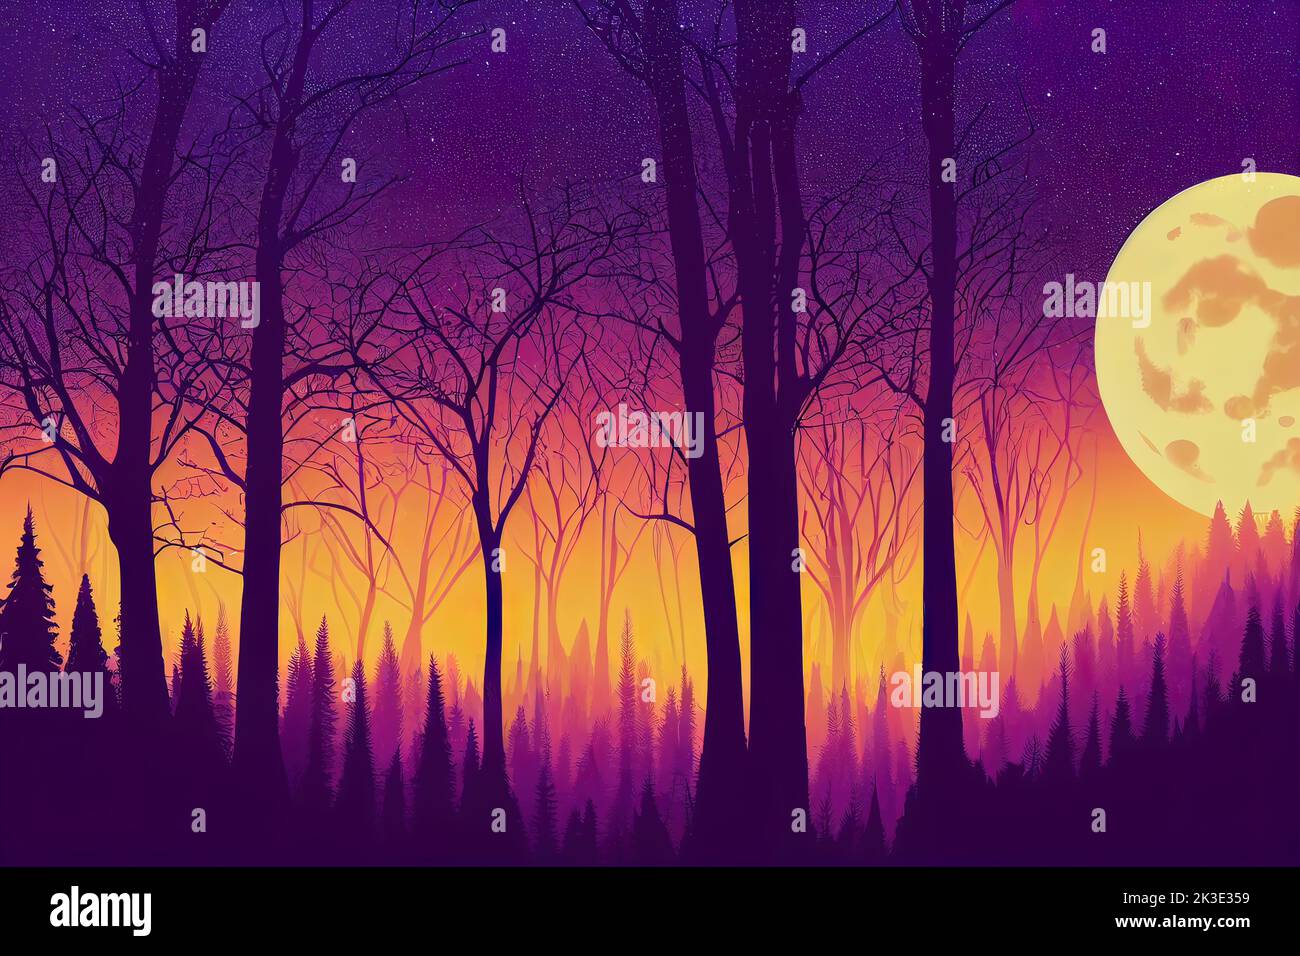 Silhouette mystical magic forest landscape in the moonlight. Silhouette trees in a cartoon style illustration. Surreal landscape for wallpapers and ba Stock Photo